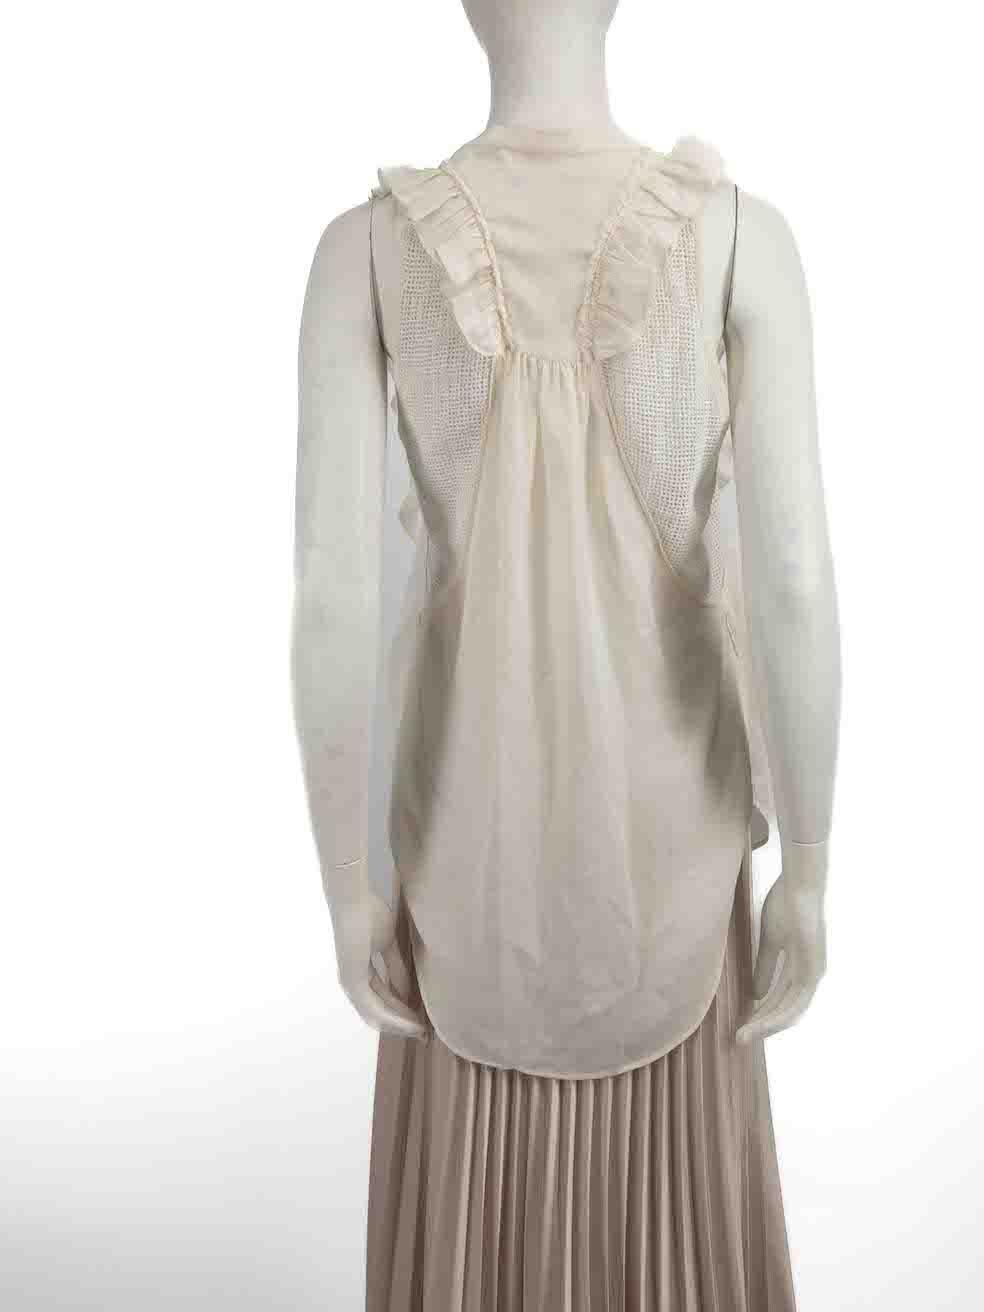 Isabel Marant White Sleeveless Mesh Ruffle Top Size S In Good Condition For Sale In London, GB